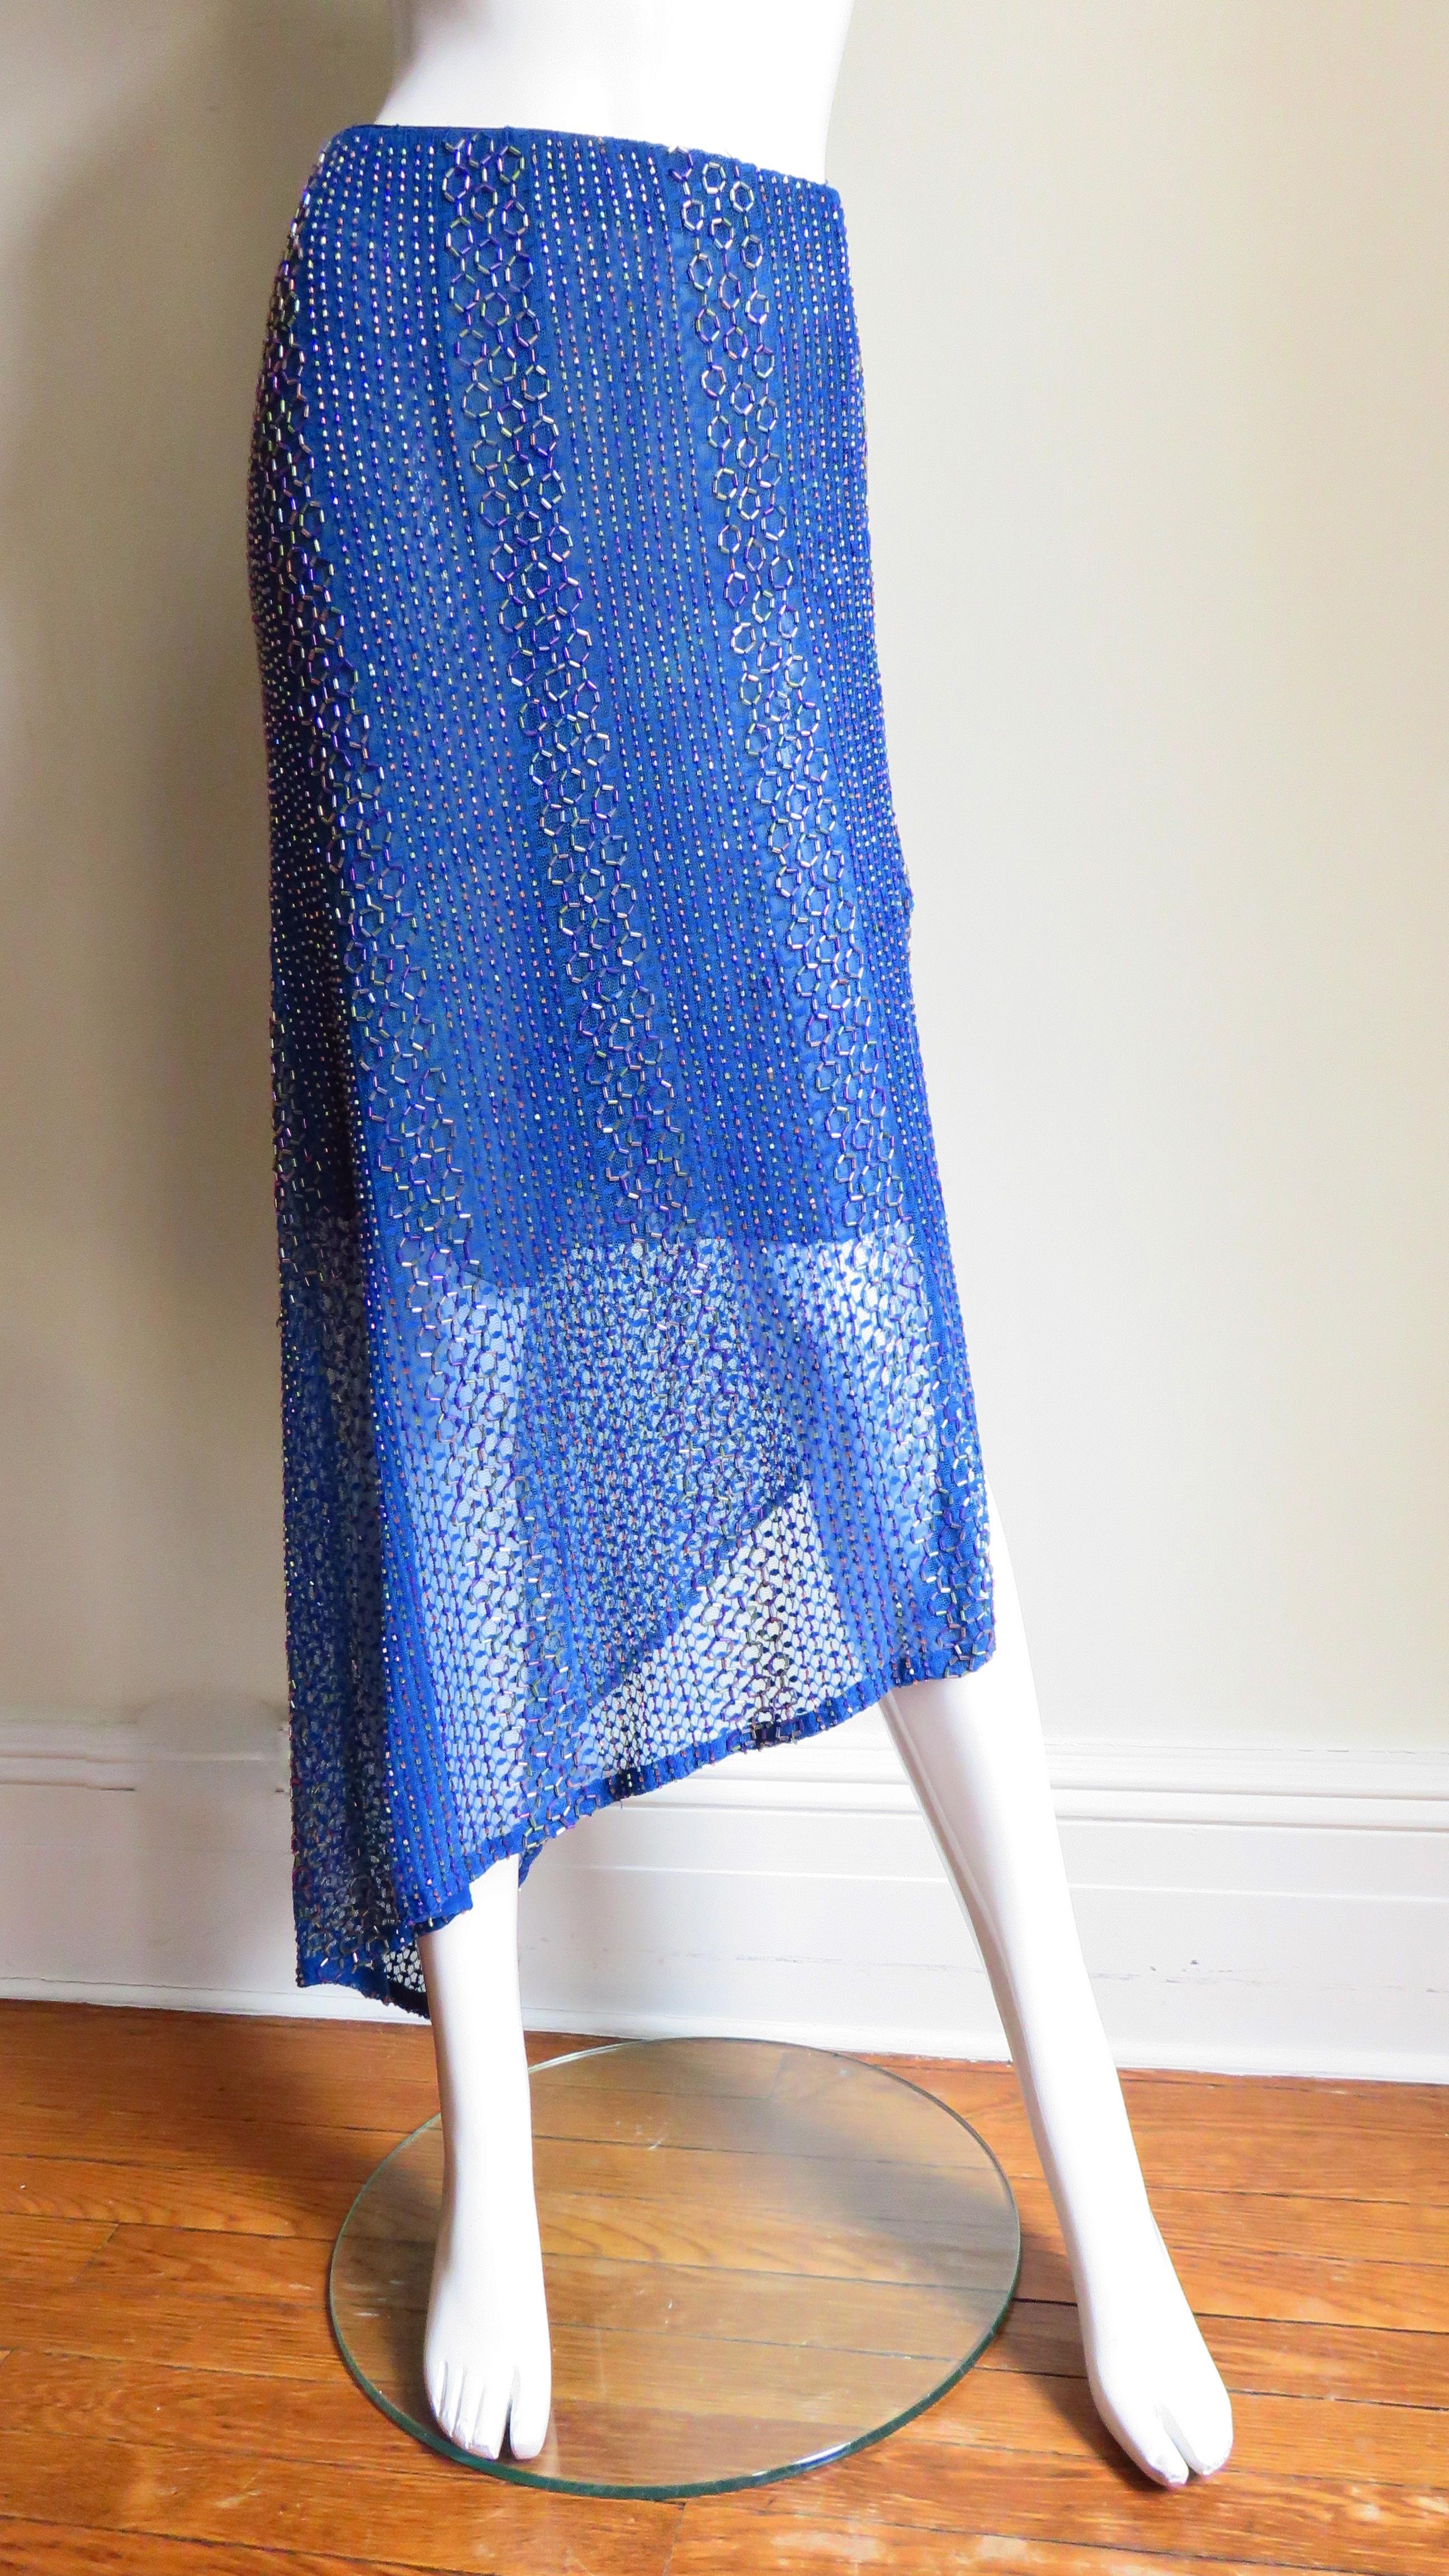 A beautiful bright blue asymmetric stretch silk mesh skirt from Ordinary People.  The skirt has an asymmetric hemline and is covered in pink, blue and grey glass tubular and seed beads in rows of lines and small circles. It is lined to the knee in